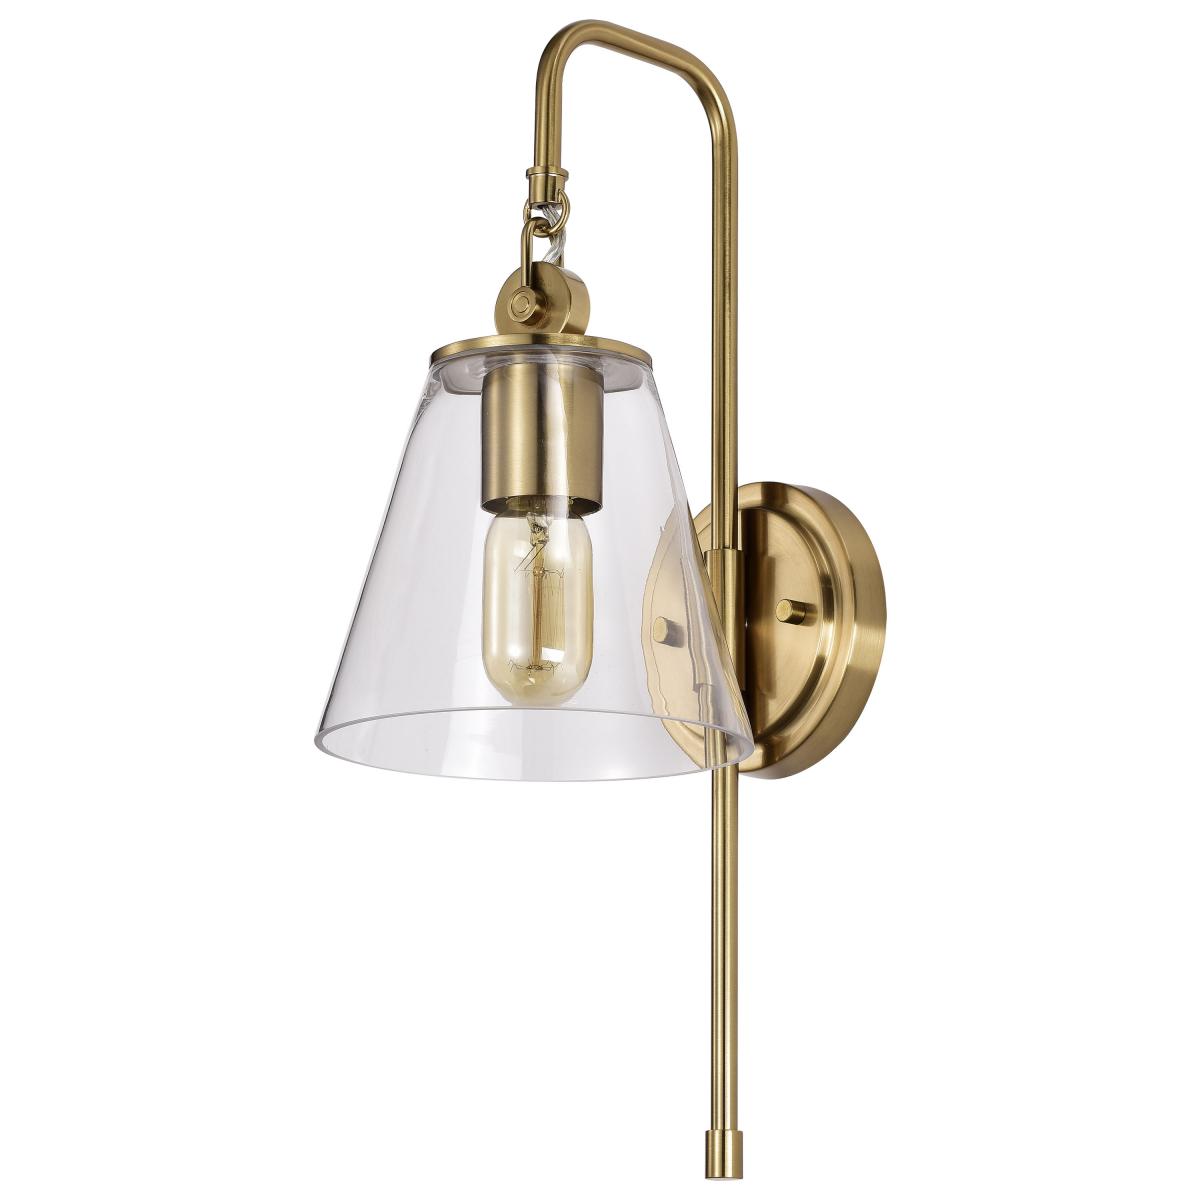 60-7449 DOVER 1 LIGHT WALL SCONCE